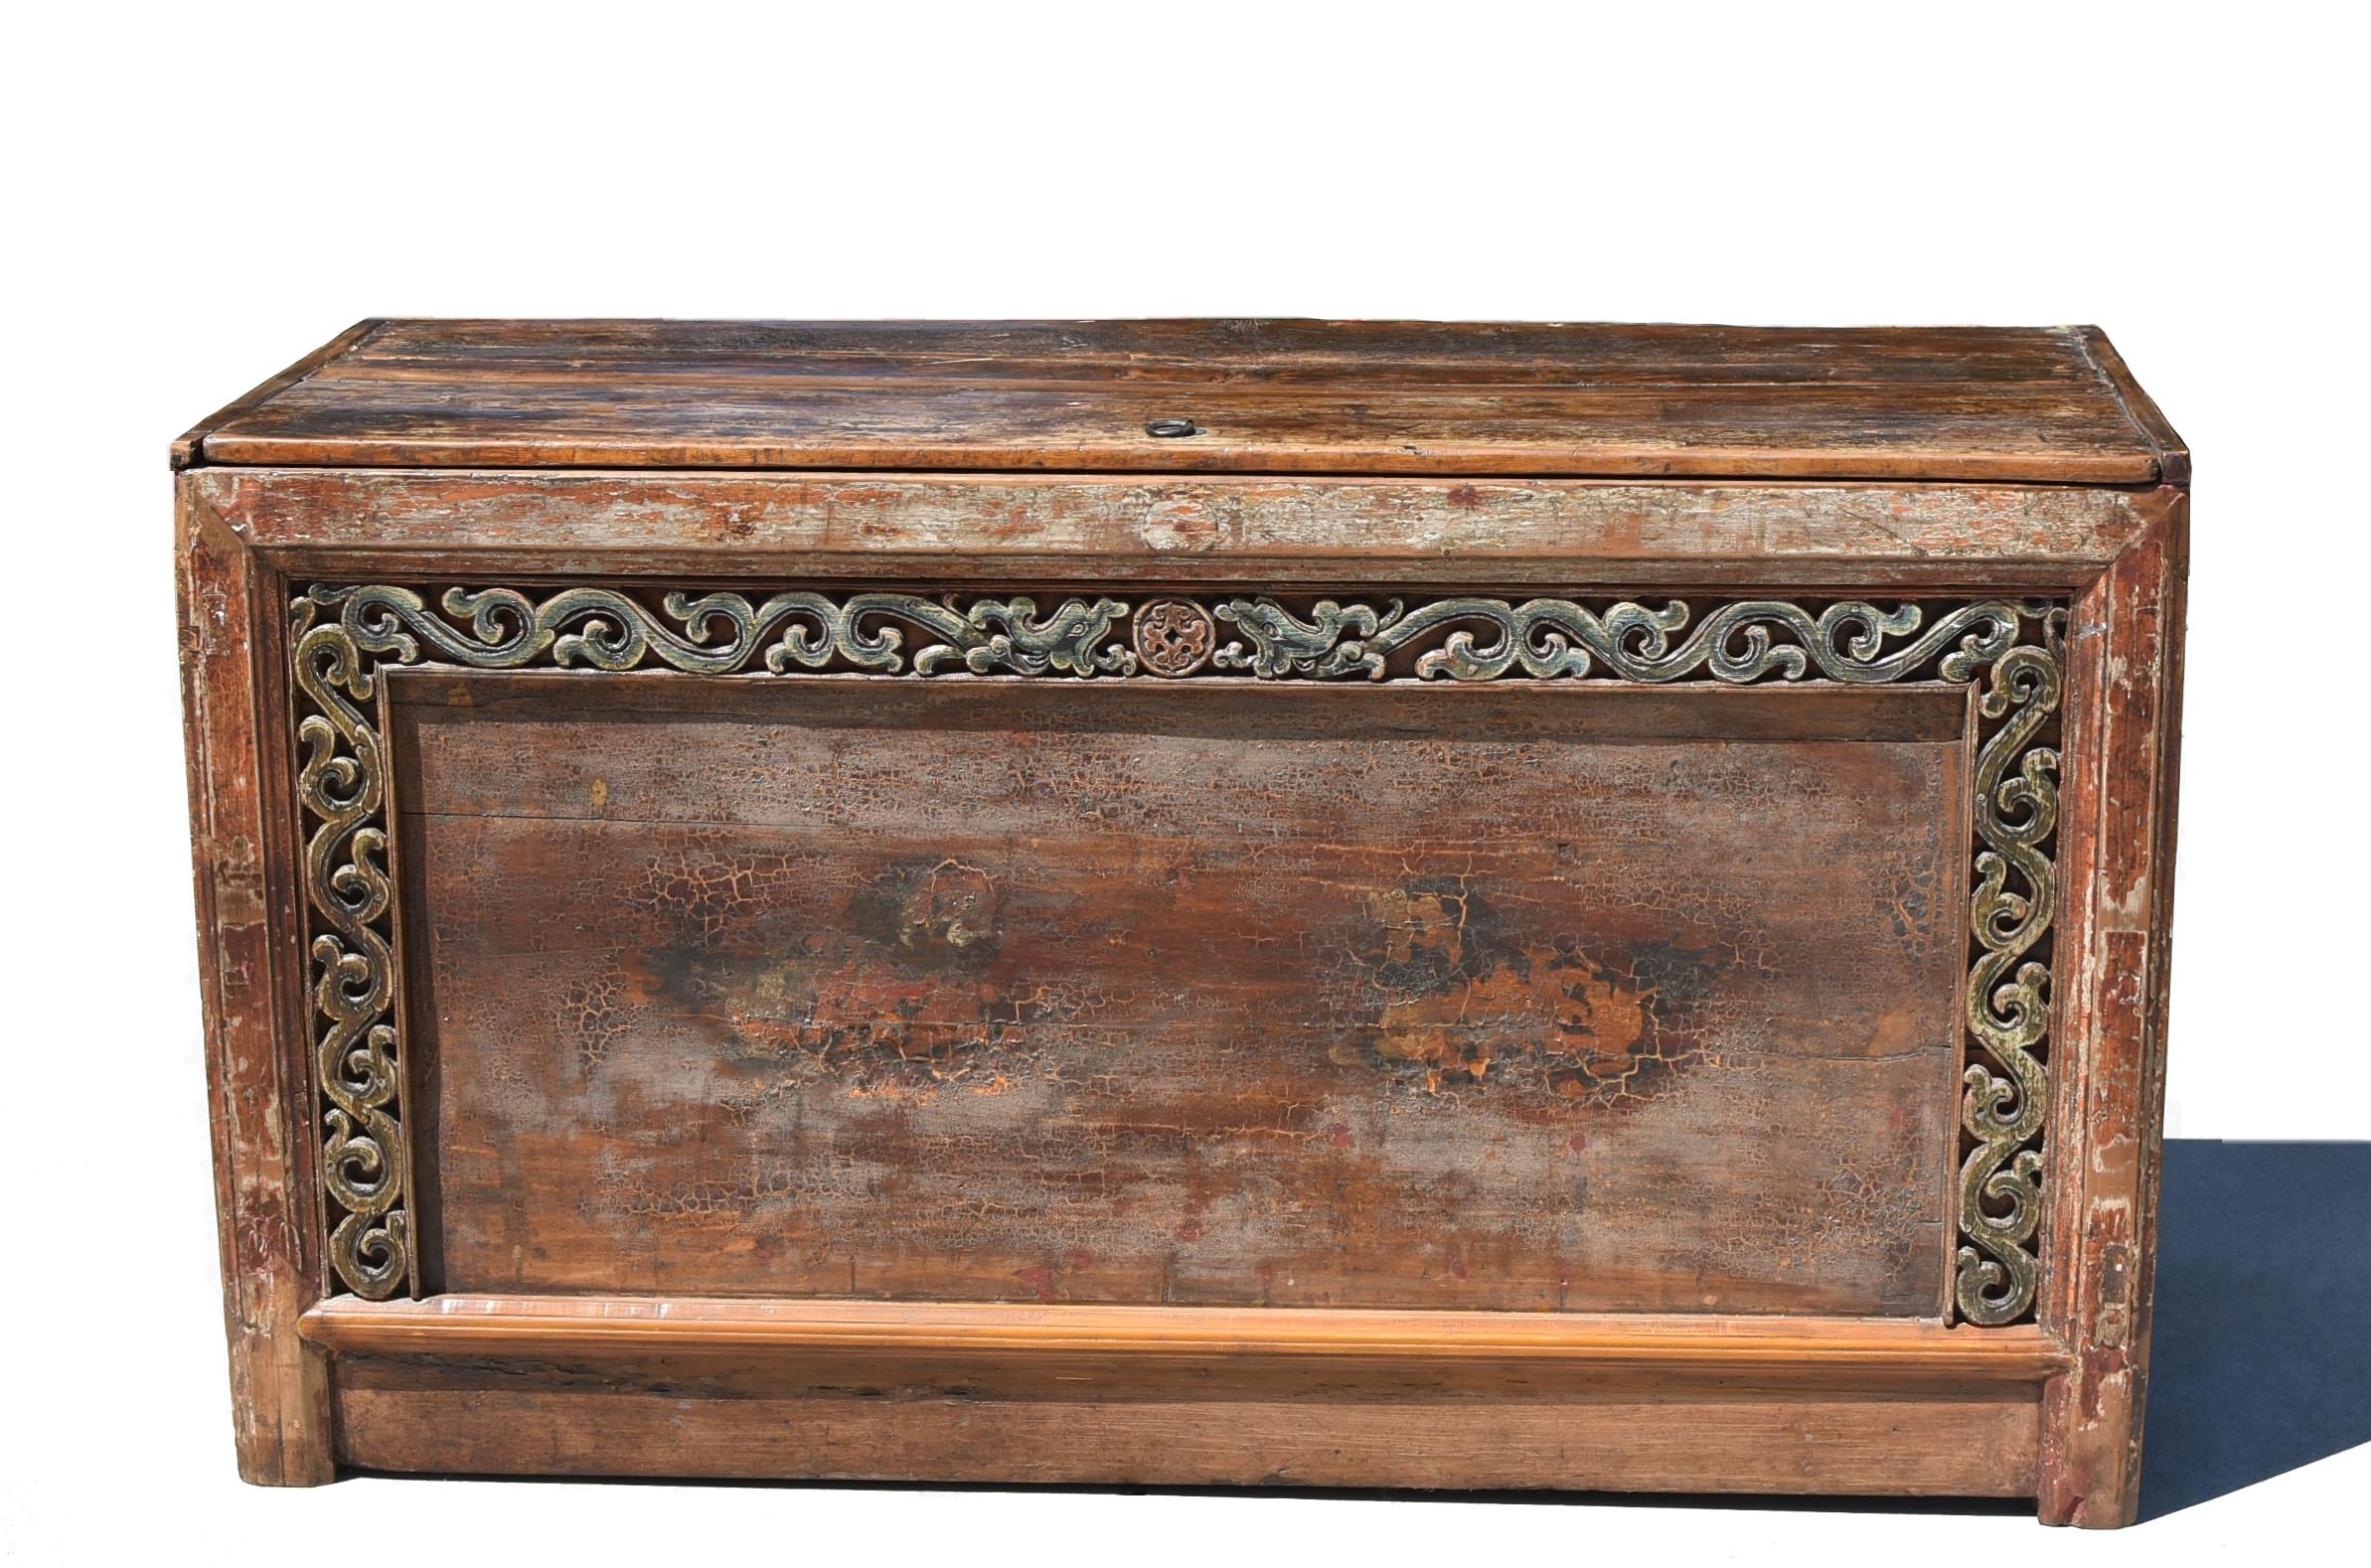 An all original, beautiful hand-painted chest, crafted by a master Mongolian artisan. Prominently featured is a pair of playful foo dogs, their curled manes and expressive eyes bringing life to the ancient imagery. Carved scrollwork weaves a